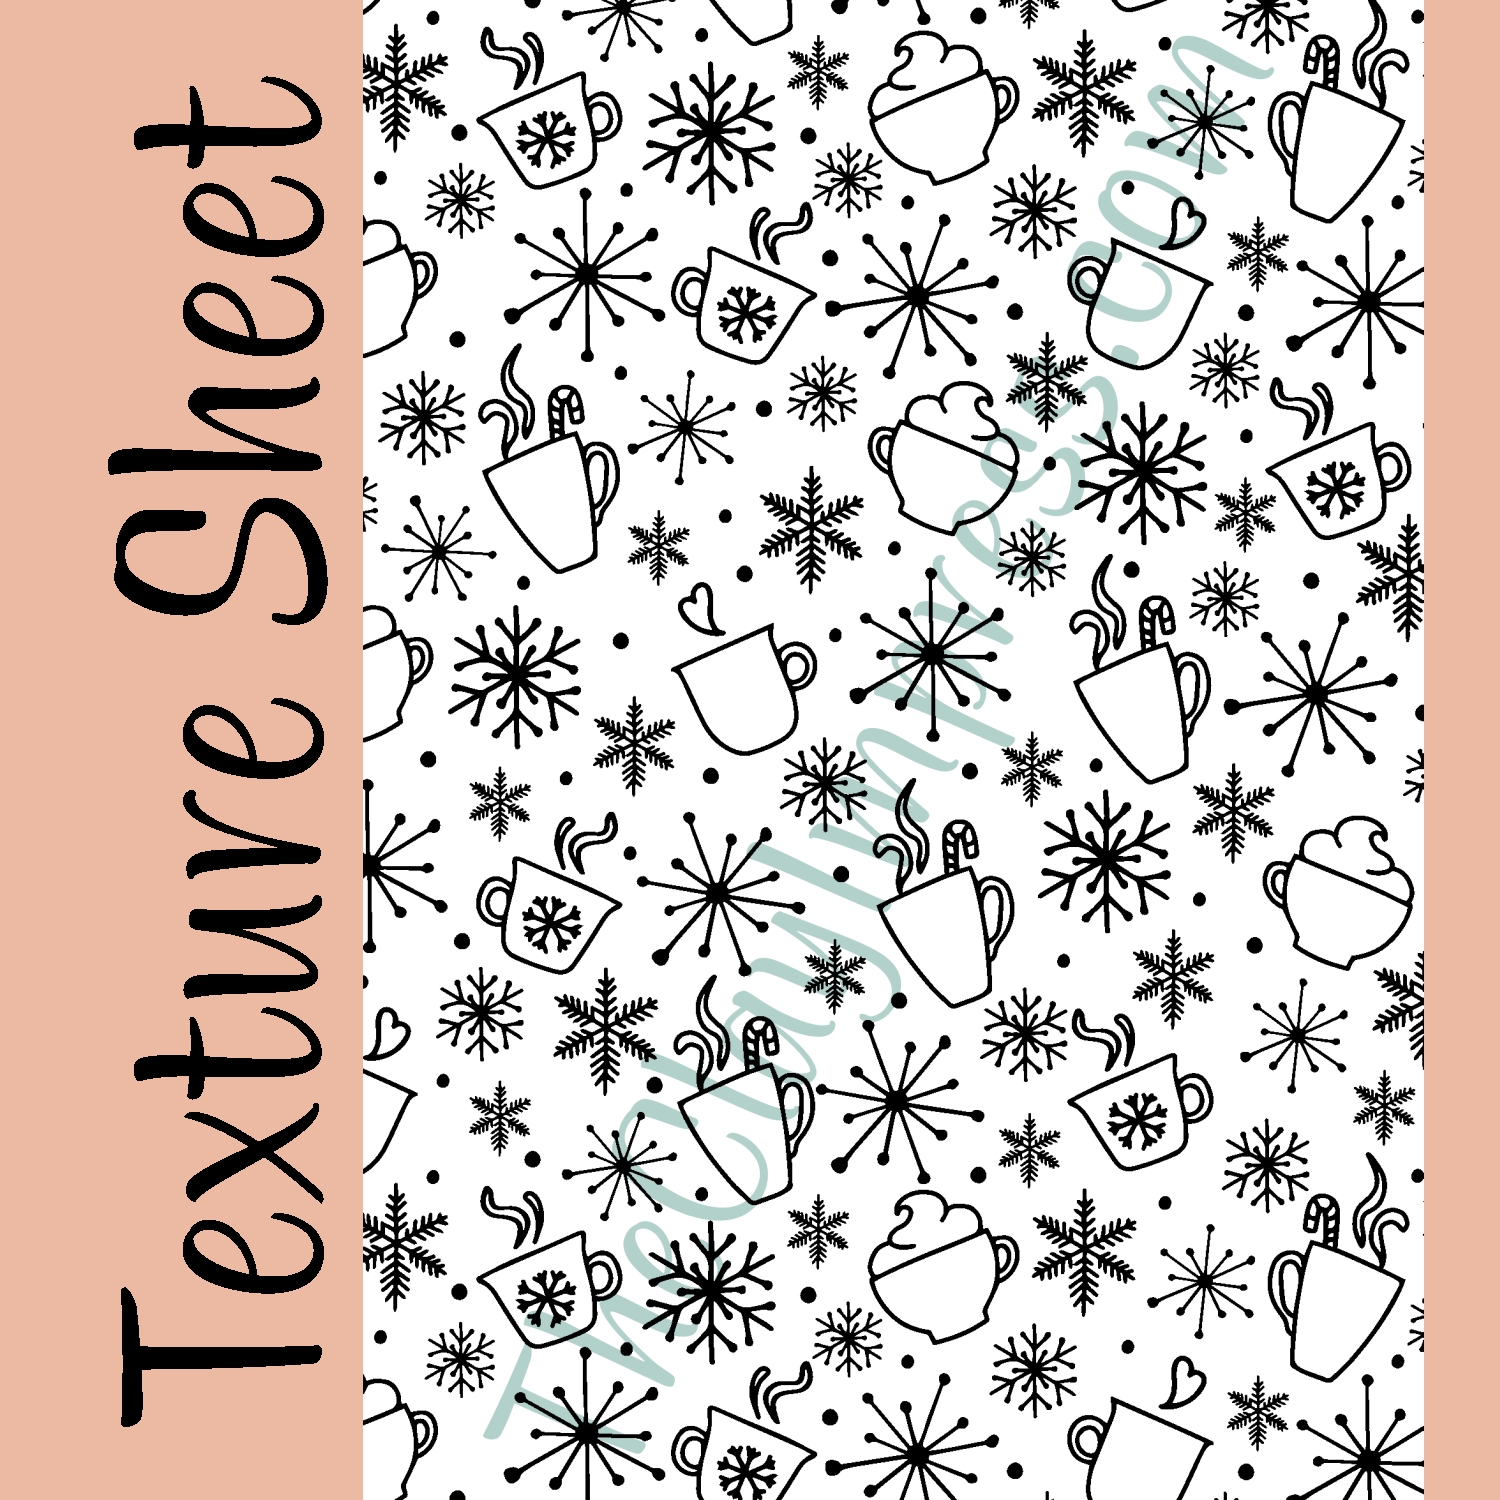 Winter themed texture sheet with snowflakes, stars and hot cocoa pattern